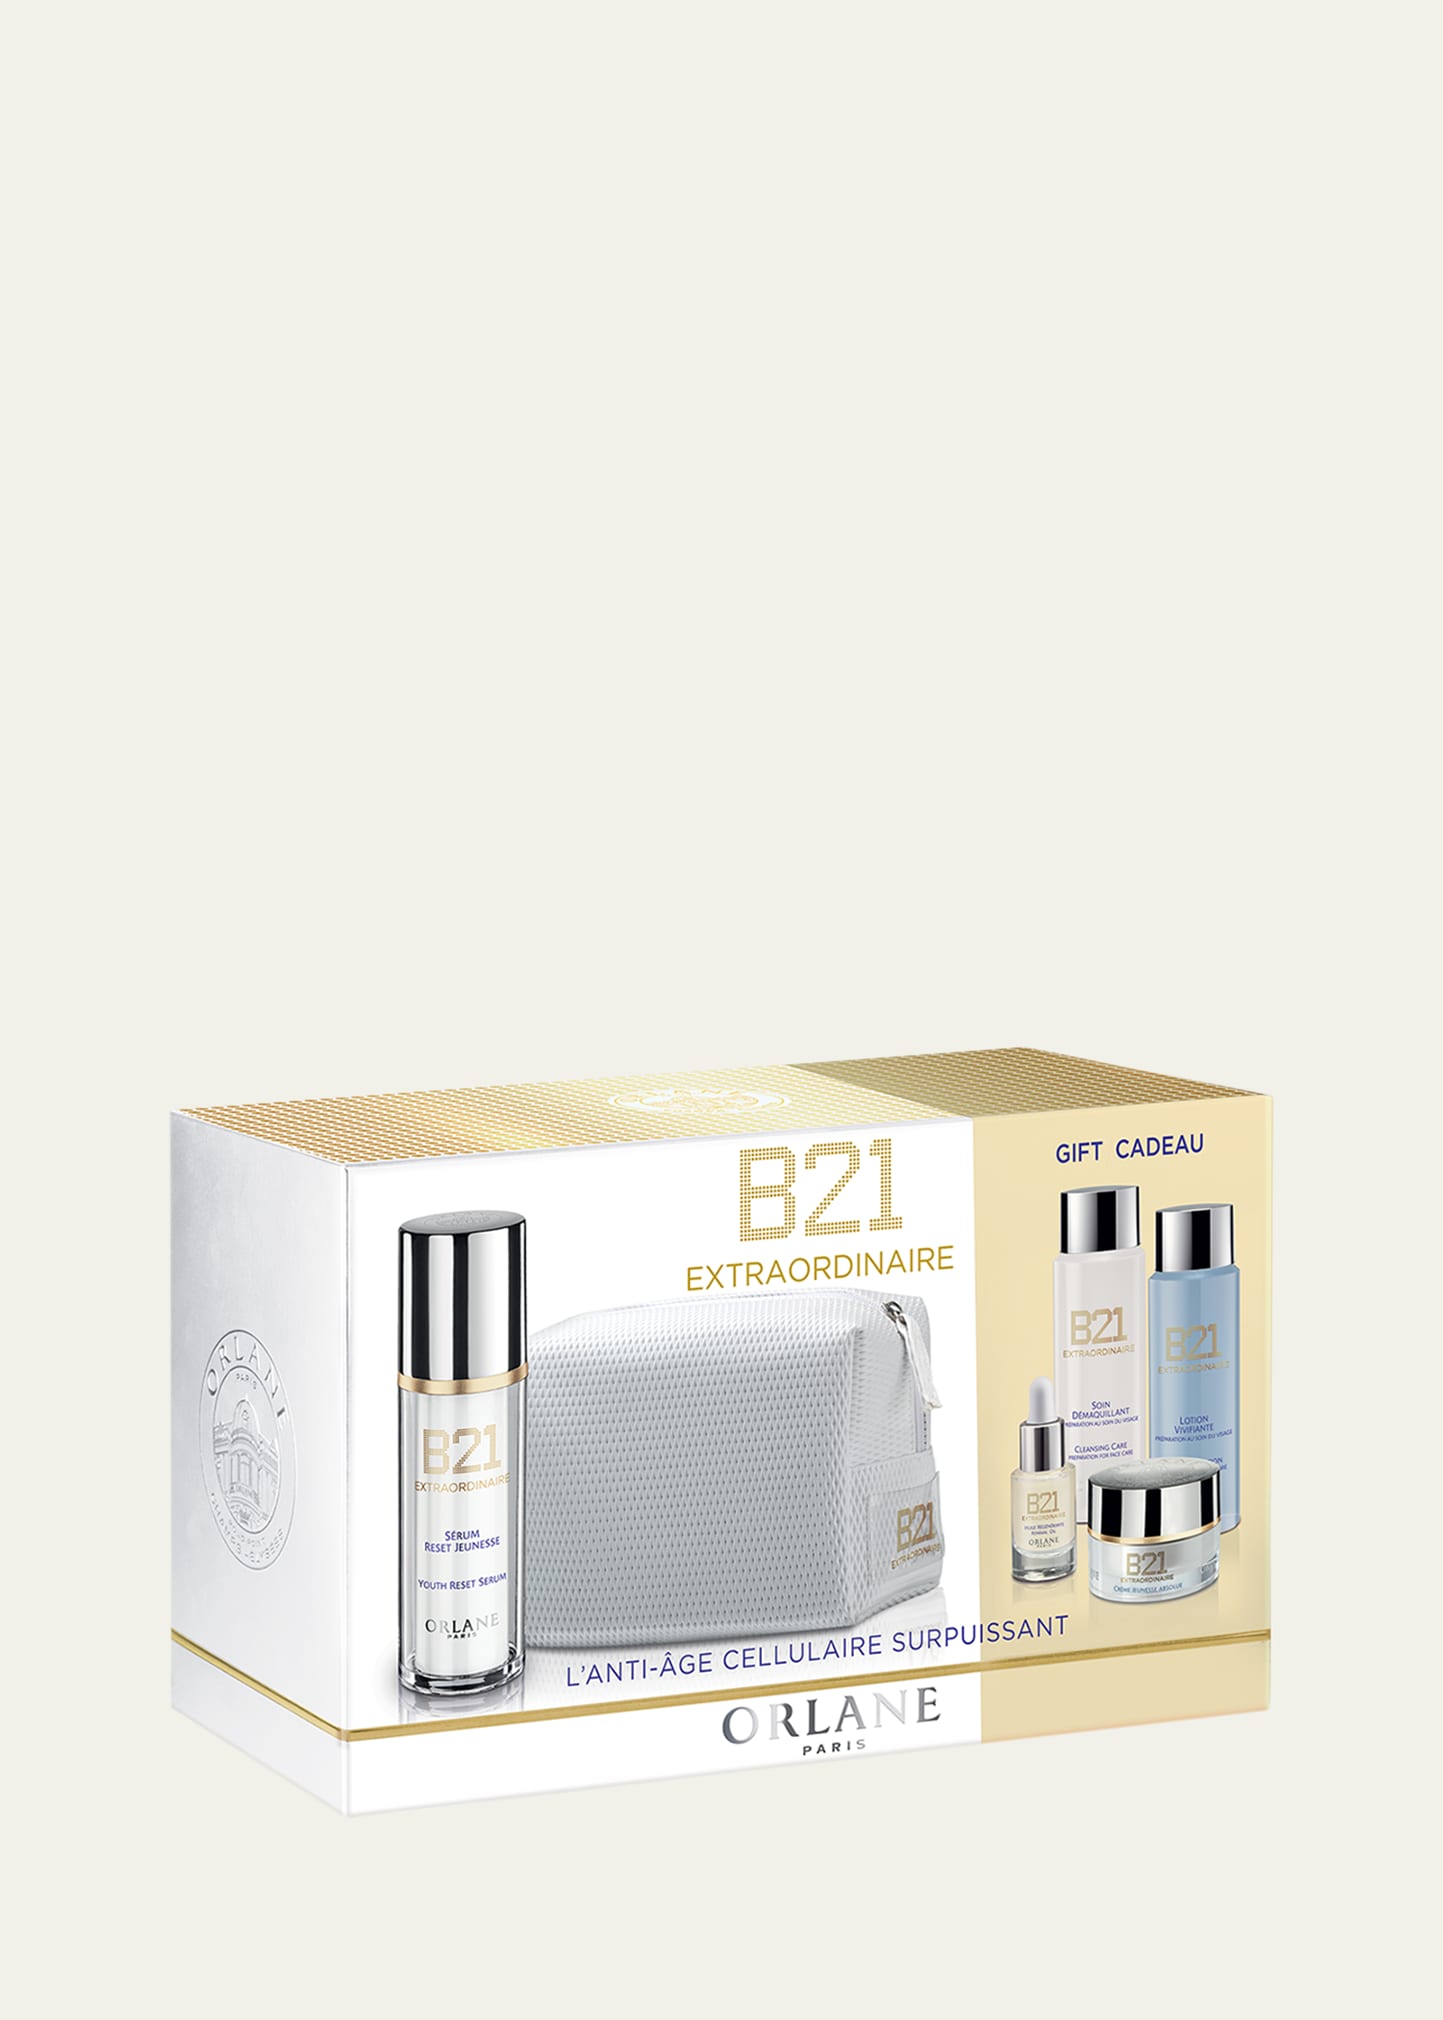 Orlane Limited Edition B21 Extraordinaire Value Set In White